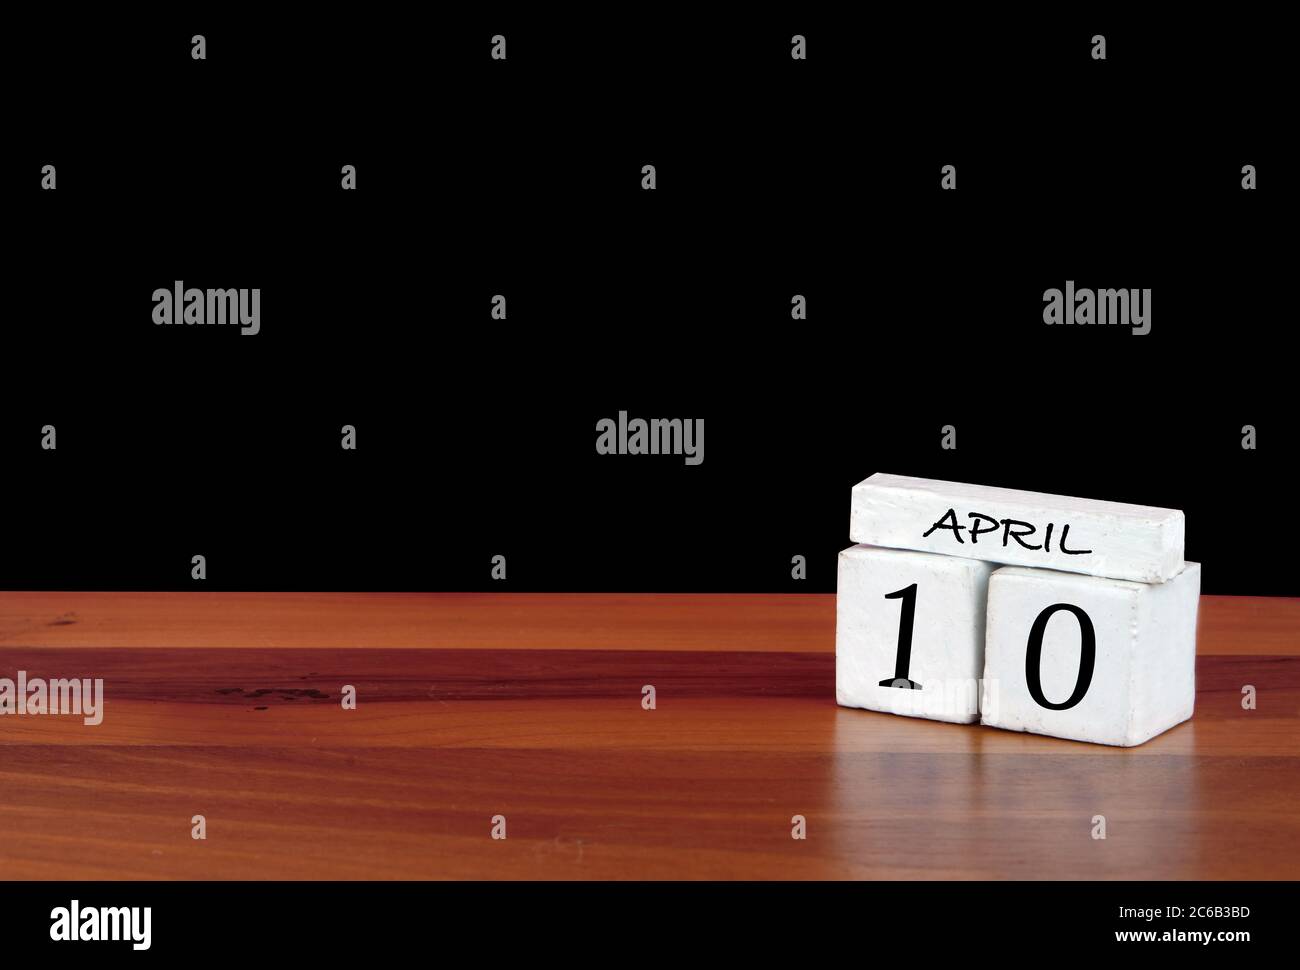 10 April calendar month. 10 days of the month. Reflected calendar on wooden floor with black background Stock Photo